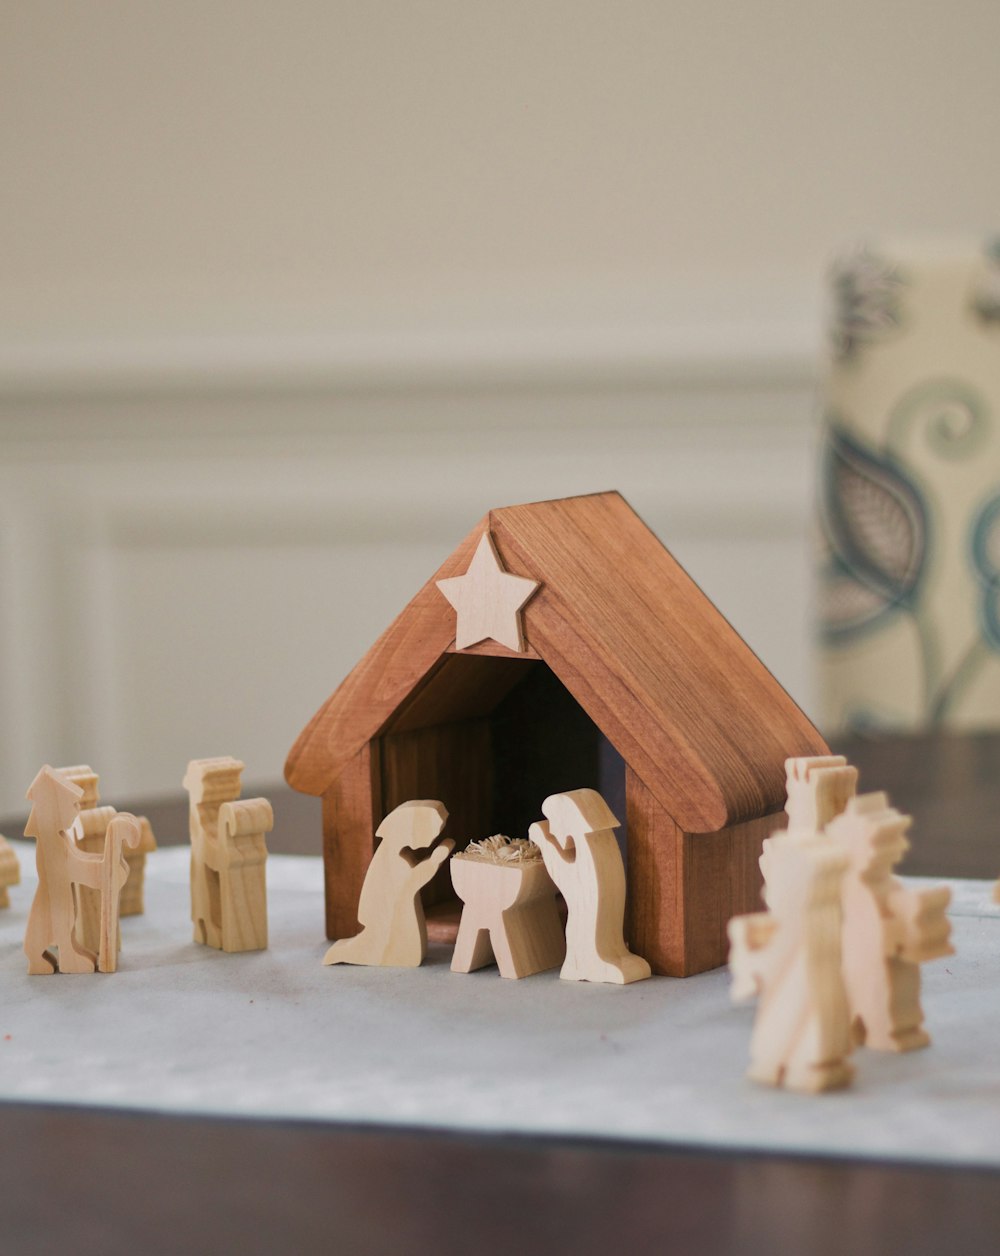 a nativity scene of a manger scene with figurines